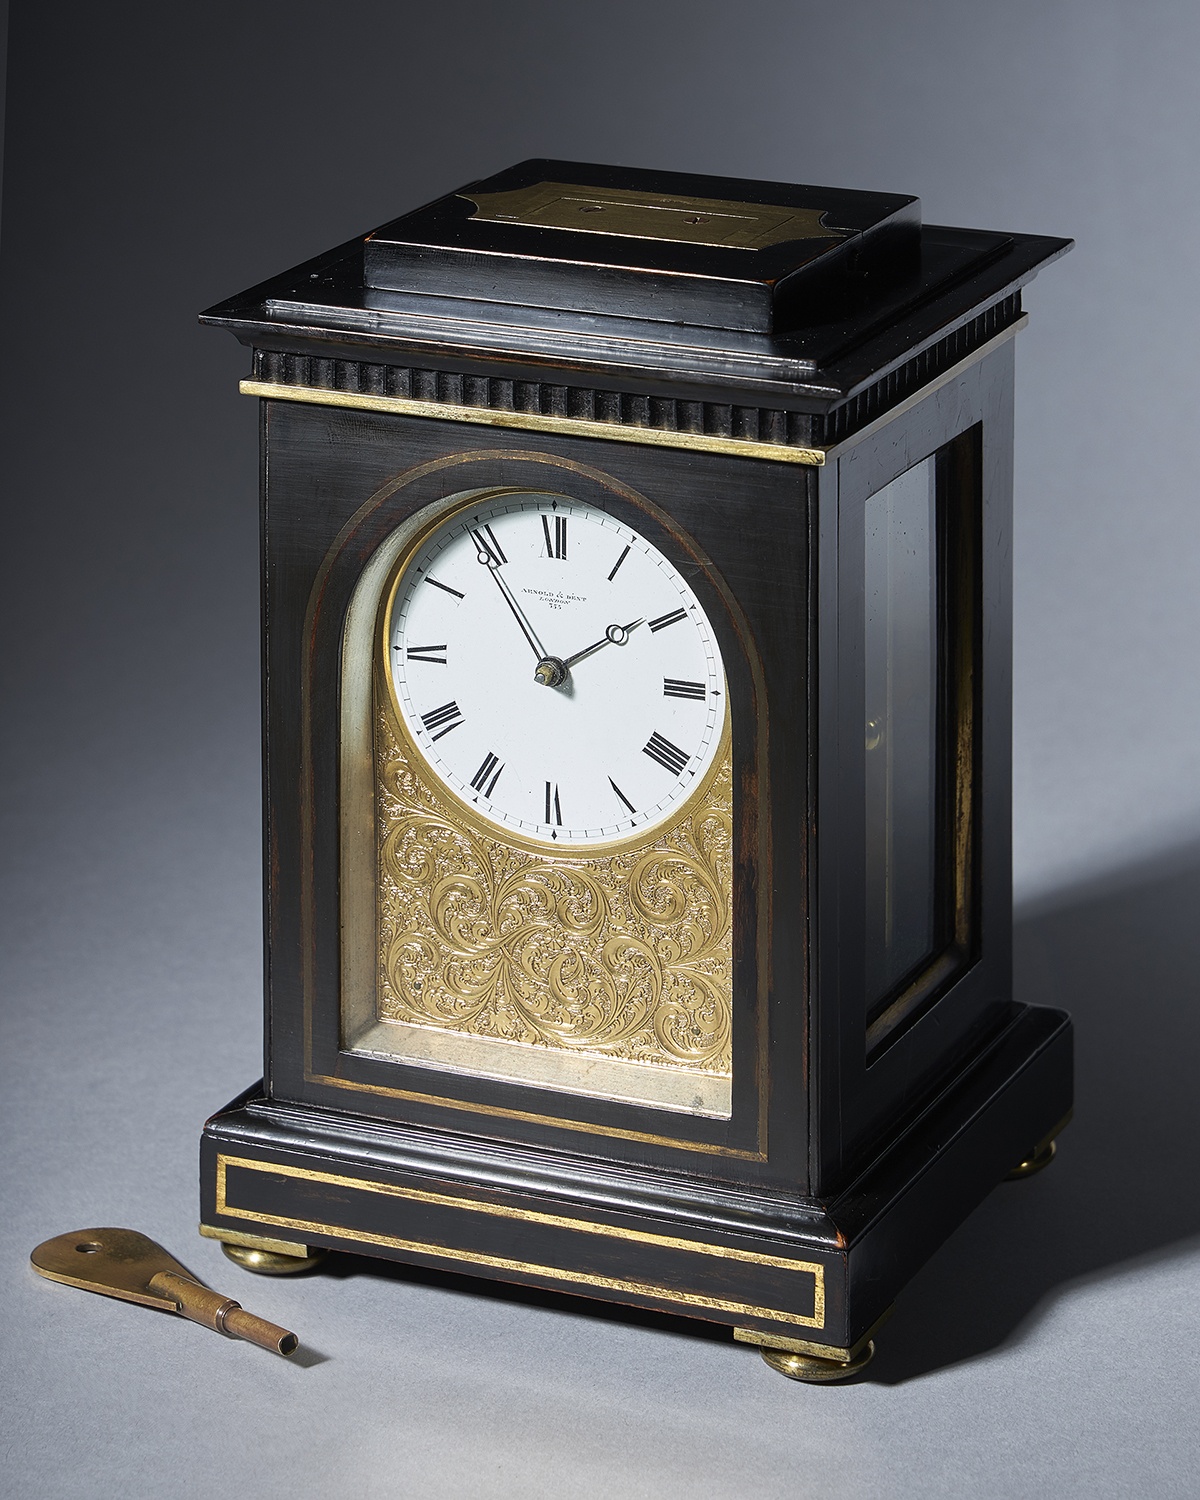 A Unique And Fine Mid 19th-Century Travelling Clock By Celebrated Makers Arnold & Dent, London 2